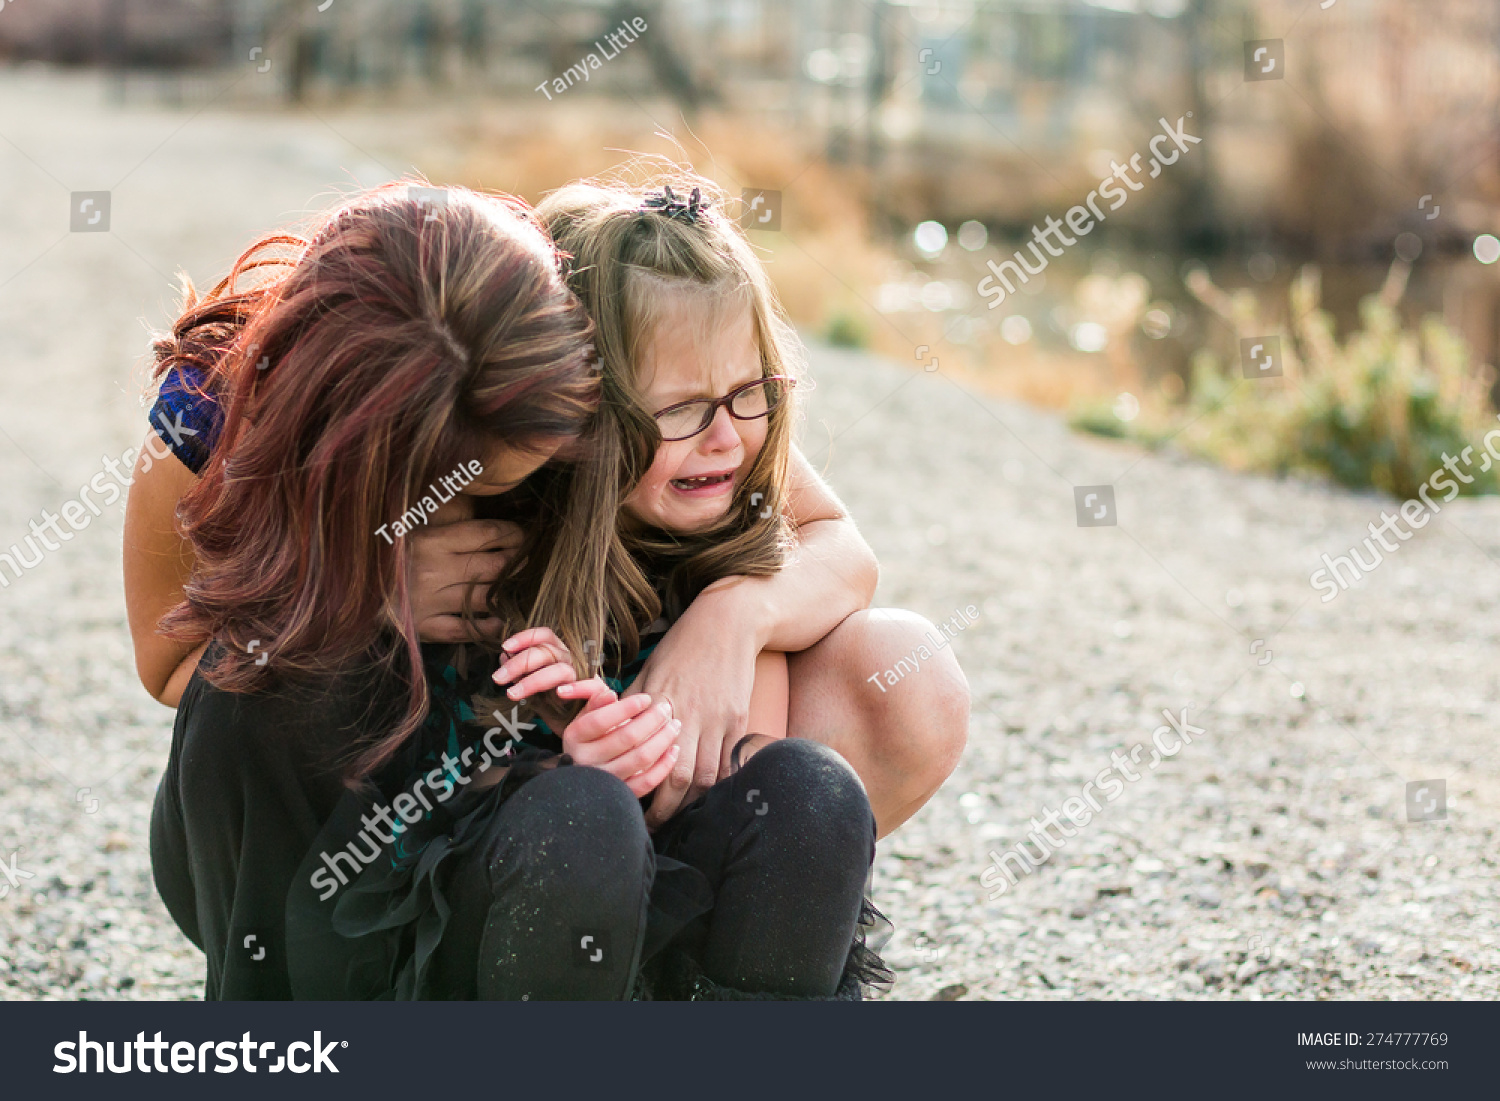 Mother Consoling Her Hurt Daughter Park Stock Photo Edit Now 274777769